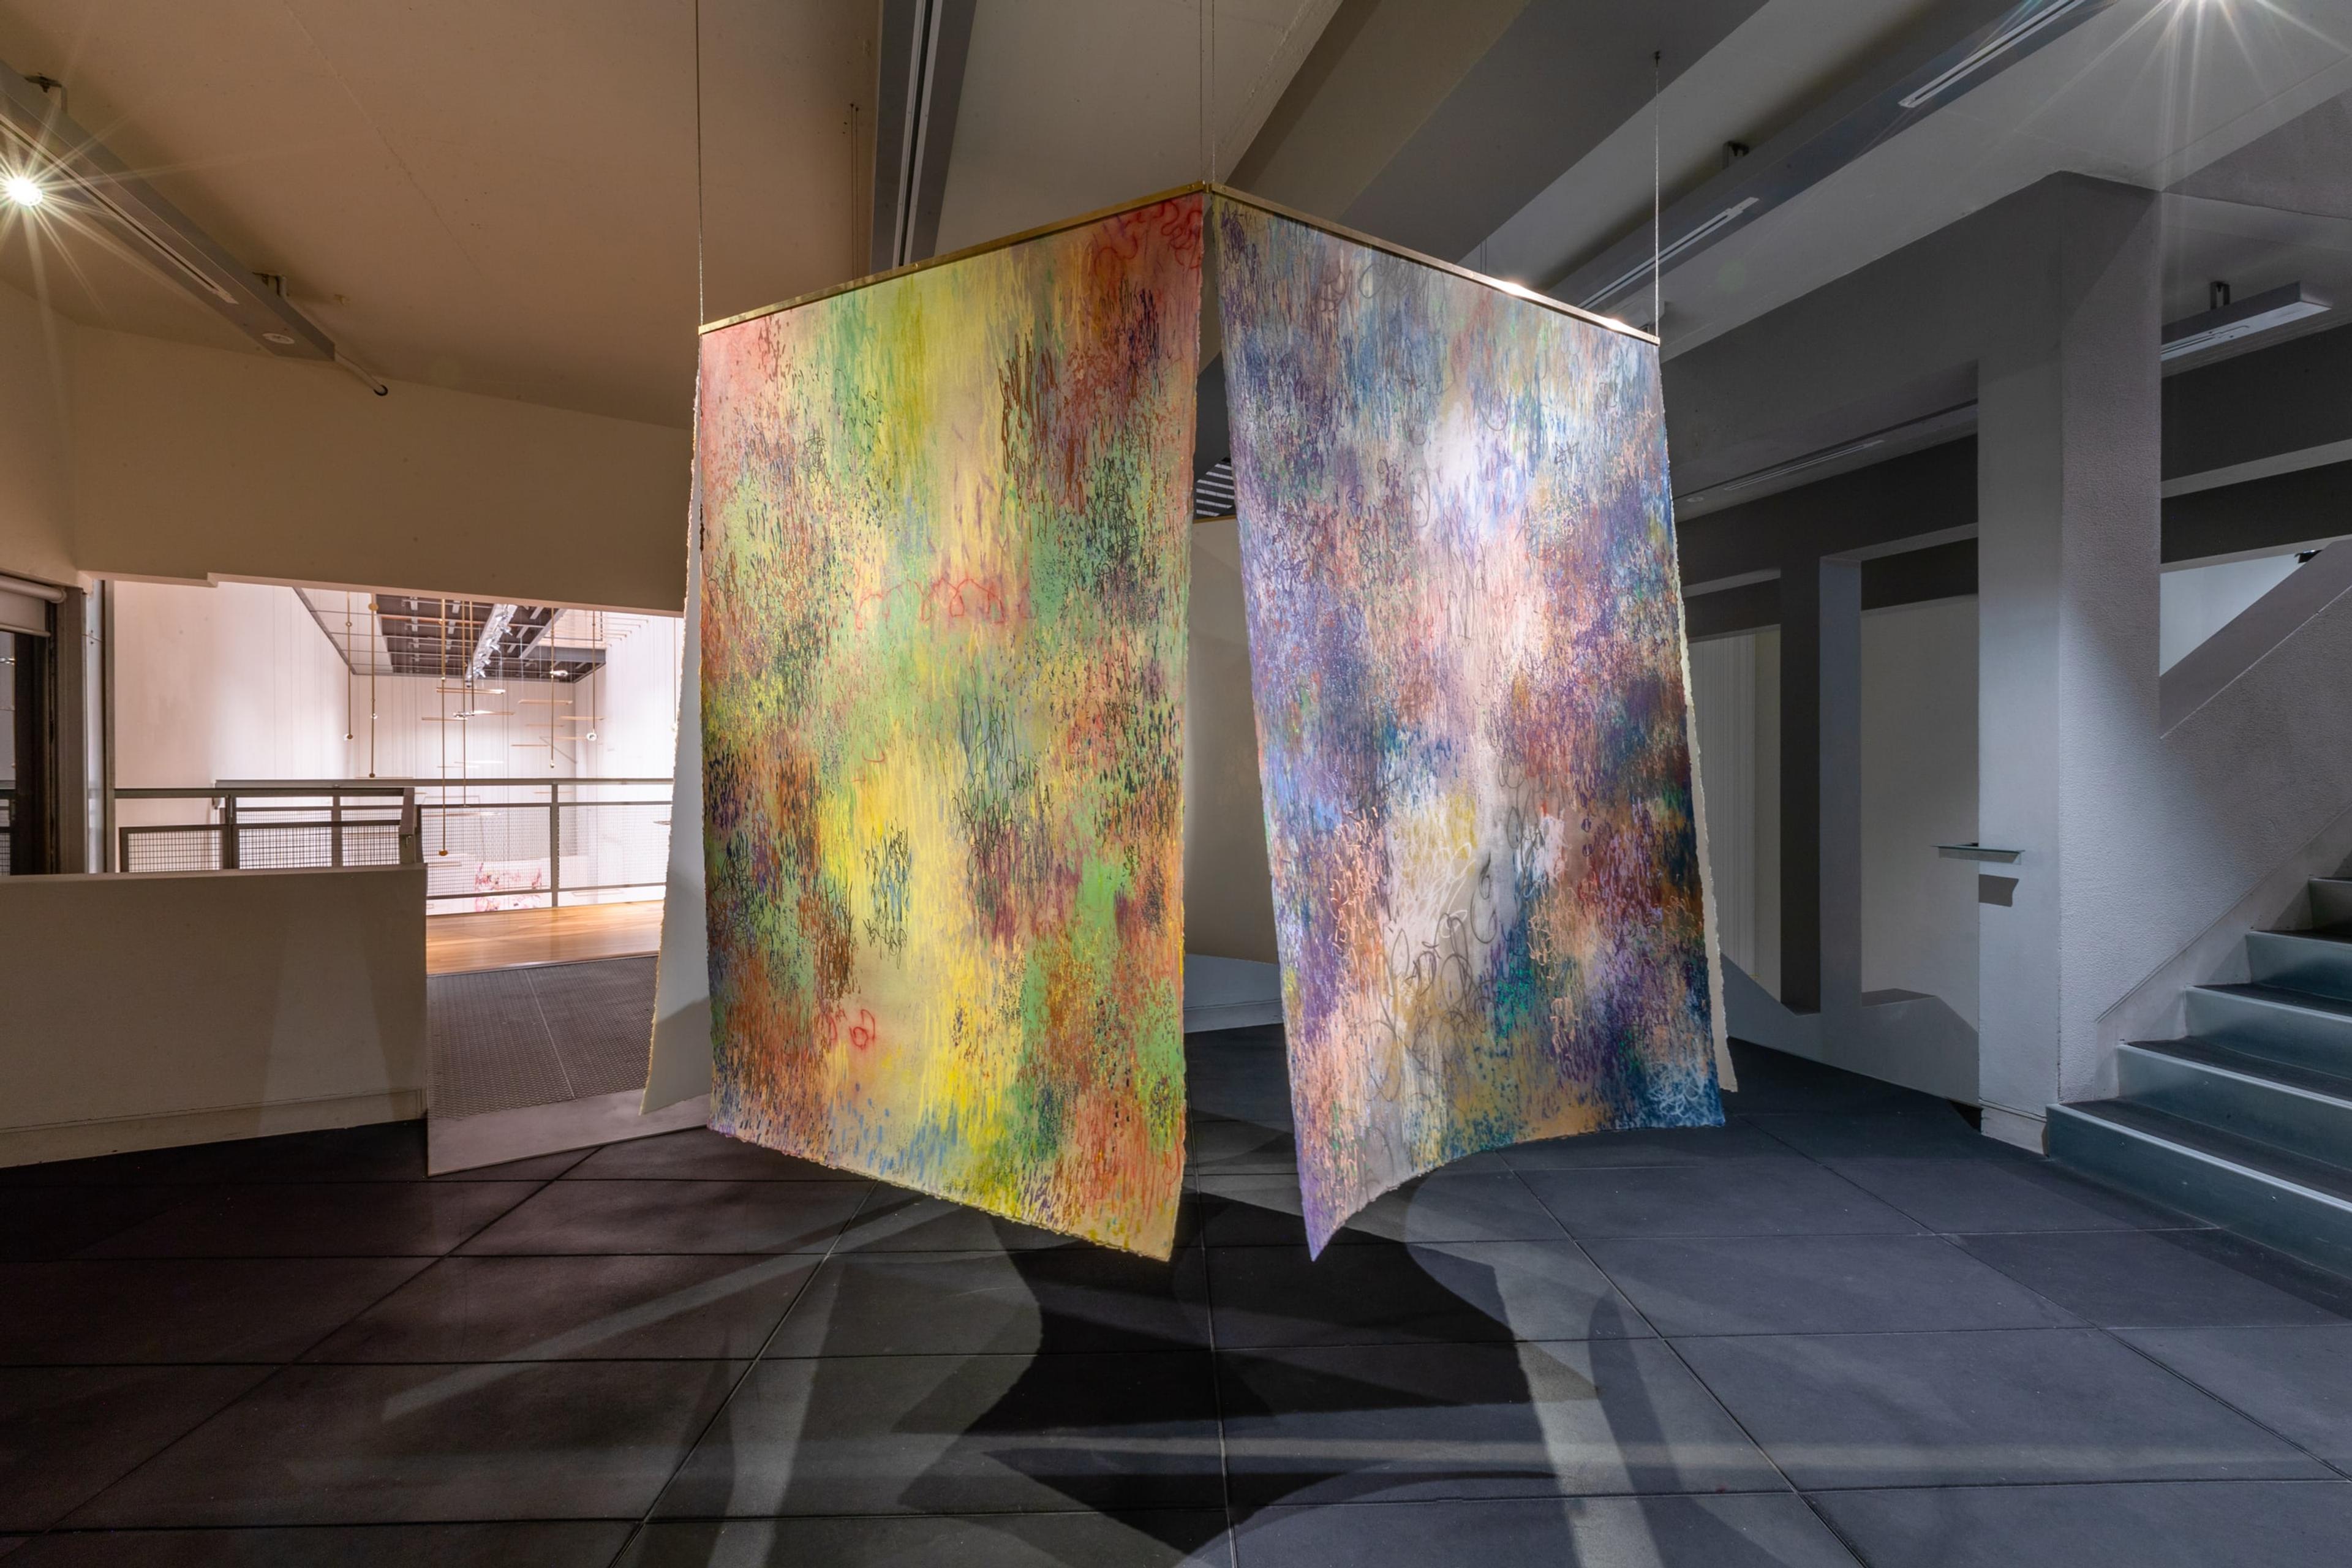 Installation view, Discharge (2022), in Energy Work: Kathy Barry/Sarah Smuts Kennedy, Te Pātaka Toi Adam Art Gallery, Victoria University of Wellington. Photo: Ted Whitaker